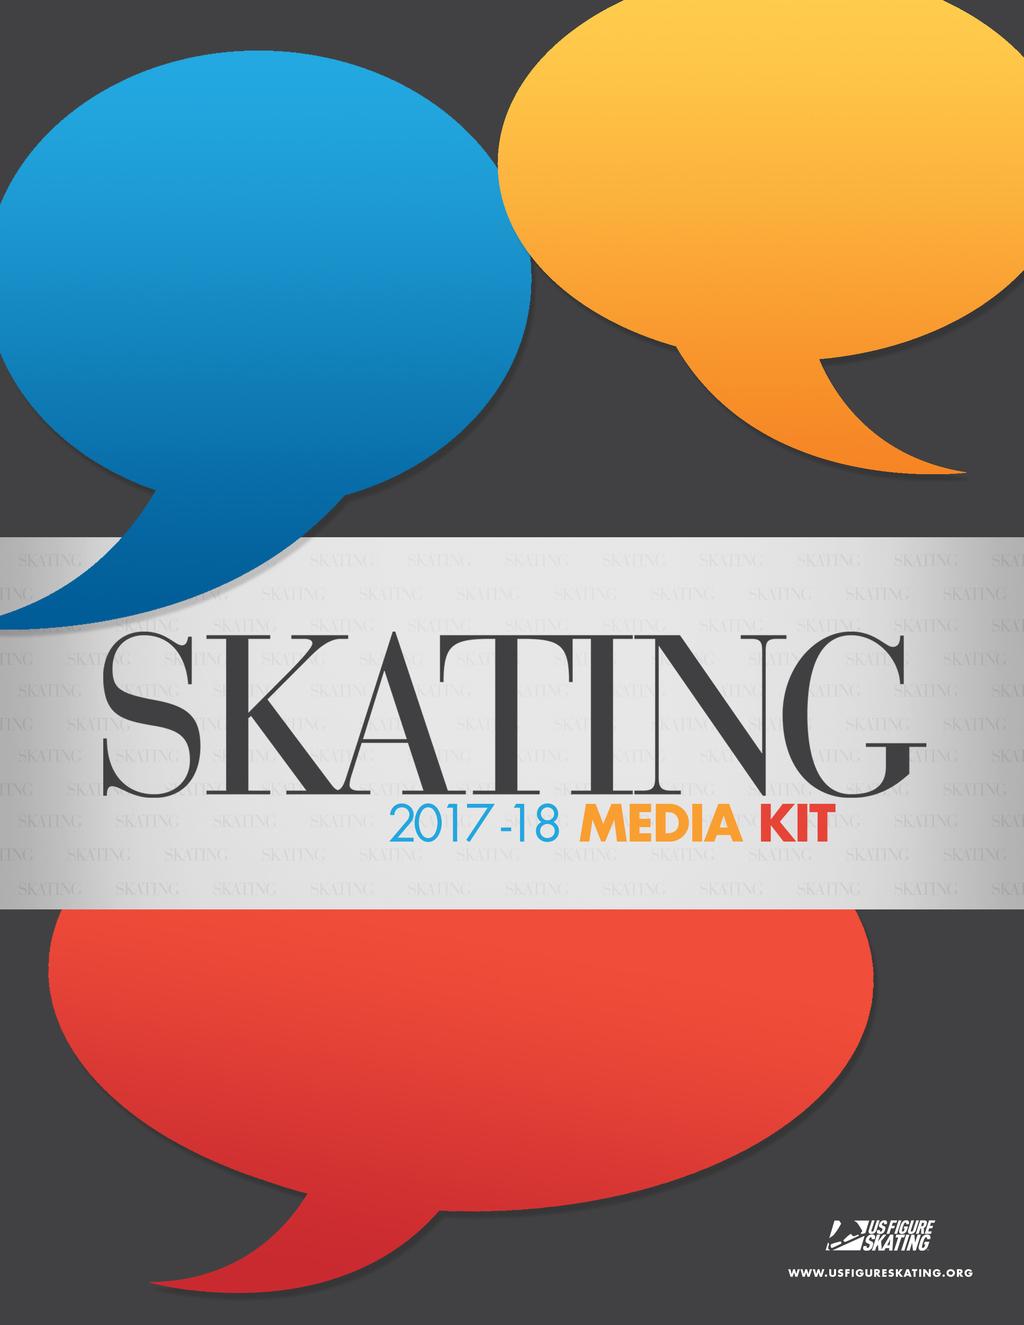 If your business wants to reach figure skaters, there is no better place to advertise that in SKATING!